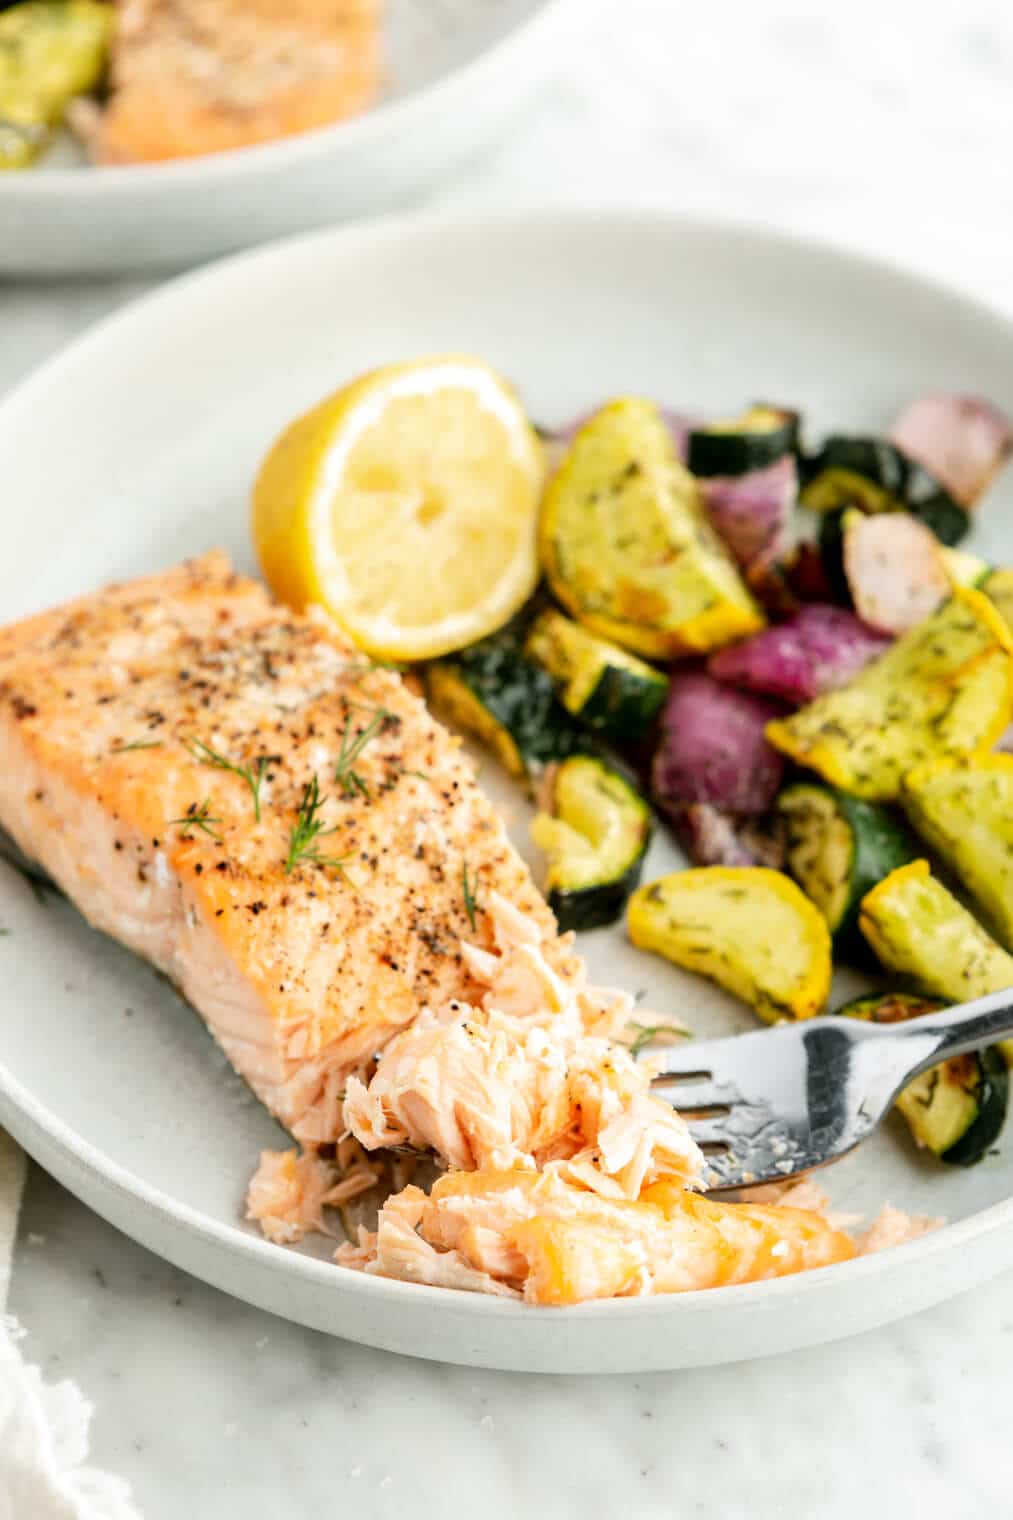 Cooked salmon filet on a plate with a fork flaking a bite of salmon. There is also a medley of vegetables on the plate.